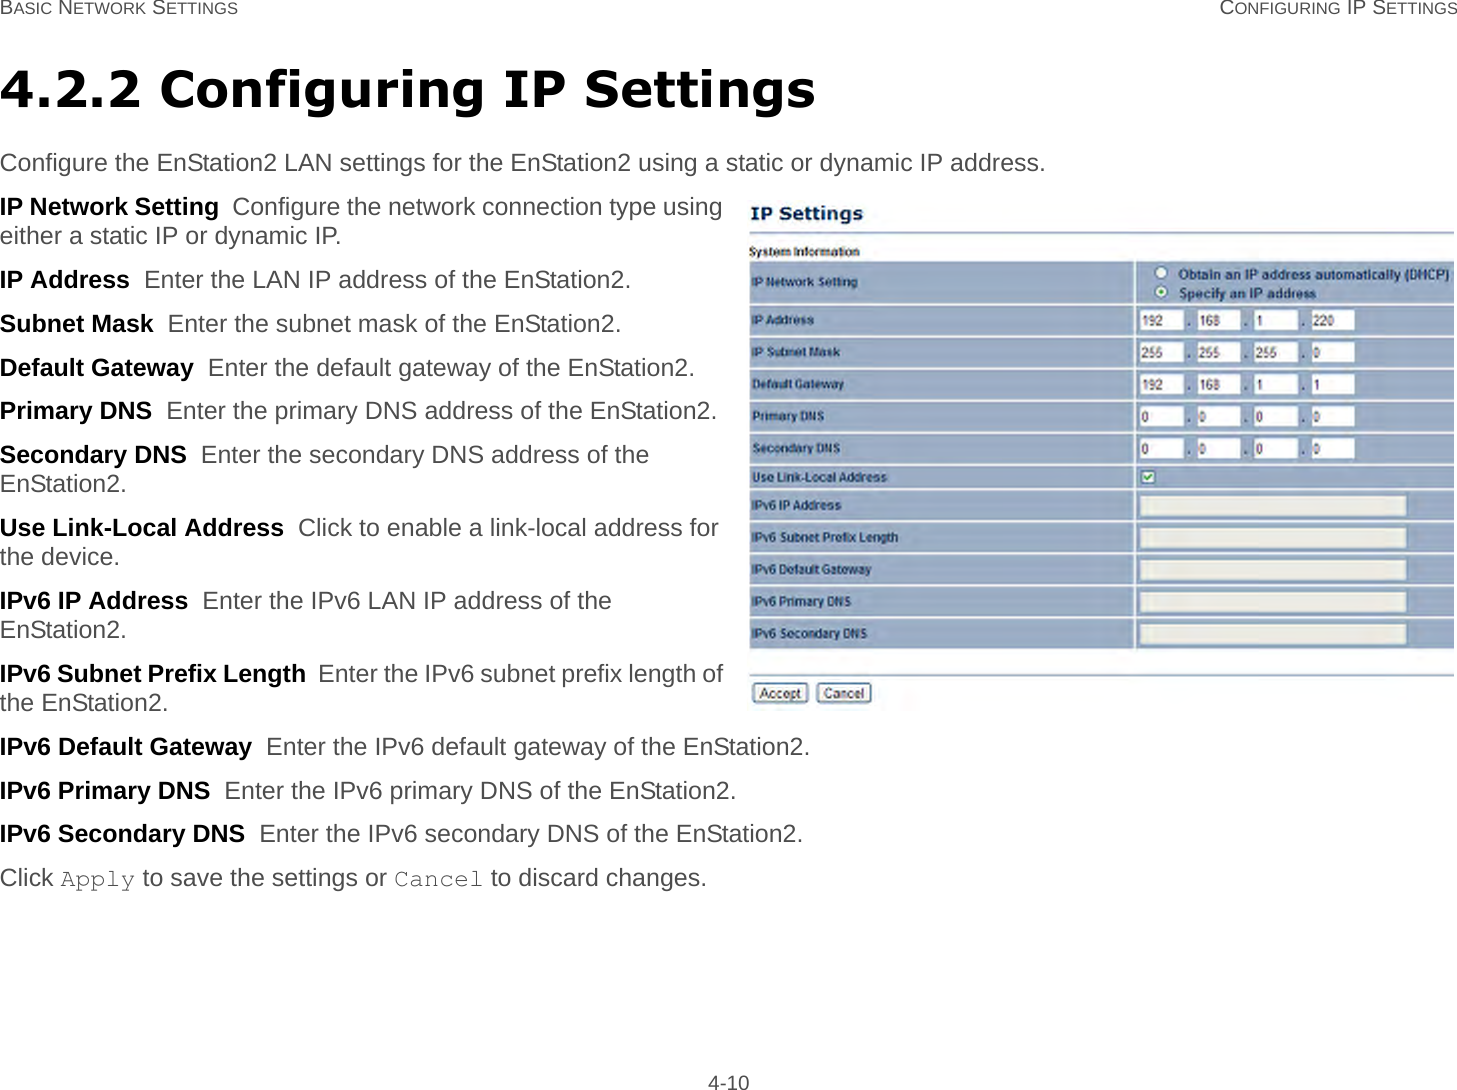 BASIC NETWORK SETTINGS CONFIGURING IP SETTINGS 4-104.2.2 Configuring IP SettingsConfigure the EnStation2 LAN settings for the EnStation2 using a static or dynamic IP address.IP Network Setting  Configure the network connection type using either a static IP or dynamic IP.IP Address  Enter the LAN IP address of the EnStation2.Subnet Mask  Enter the subnet mask of the EnStation2.Default Gateway  Enter the default gateway of the EnStation2.Primary DNS  Enter the primary DNS address of the EnStation2.Secondary DNS  Enter the secondary DNS address of the EnStation2.Use Link-Local Address  Click to enable a link-local address for the device.IPv6 IP Address  Enter the IPv6 LAN IP address of the EnStation2.IPv6 Subnet Prefix Length  Enter the IPv6 subnet prefix length of the EnStation2.IPv6 Default Gateway  Enter the IPv6 default gateway of the EnStation2.IPv6 Primary DNS  Enter the IPv6 primary DNS of the EnStation2.IPv6 Secondary DNS  Enter the IPv6 secondary DNS of the EnStation2.Click Apply to save the settings or Cancel to discard changes.